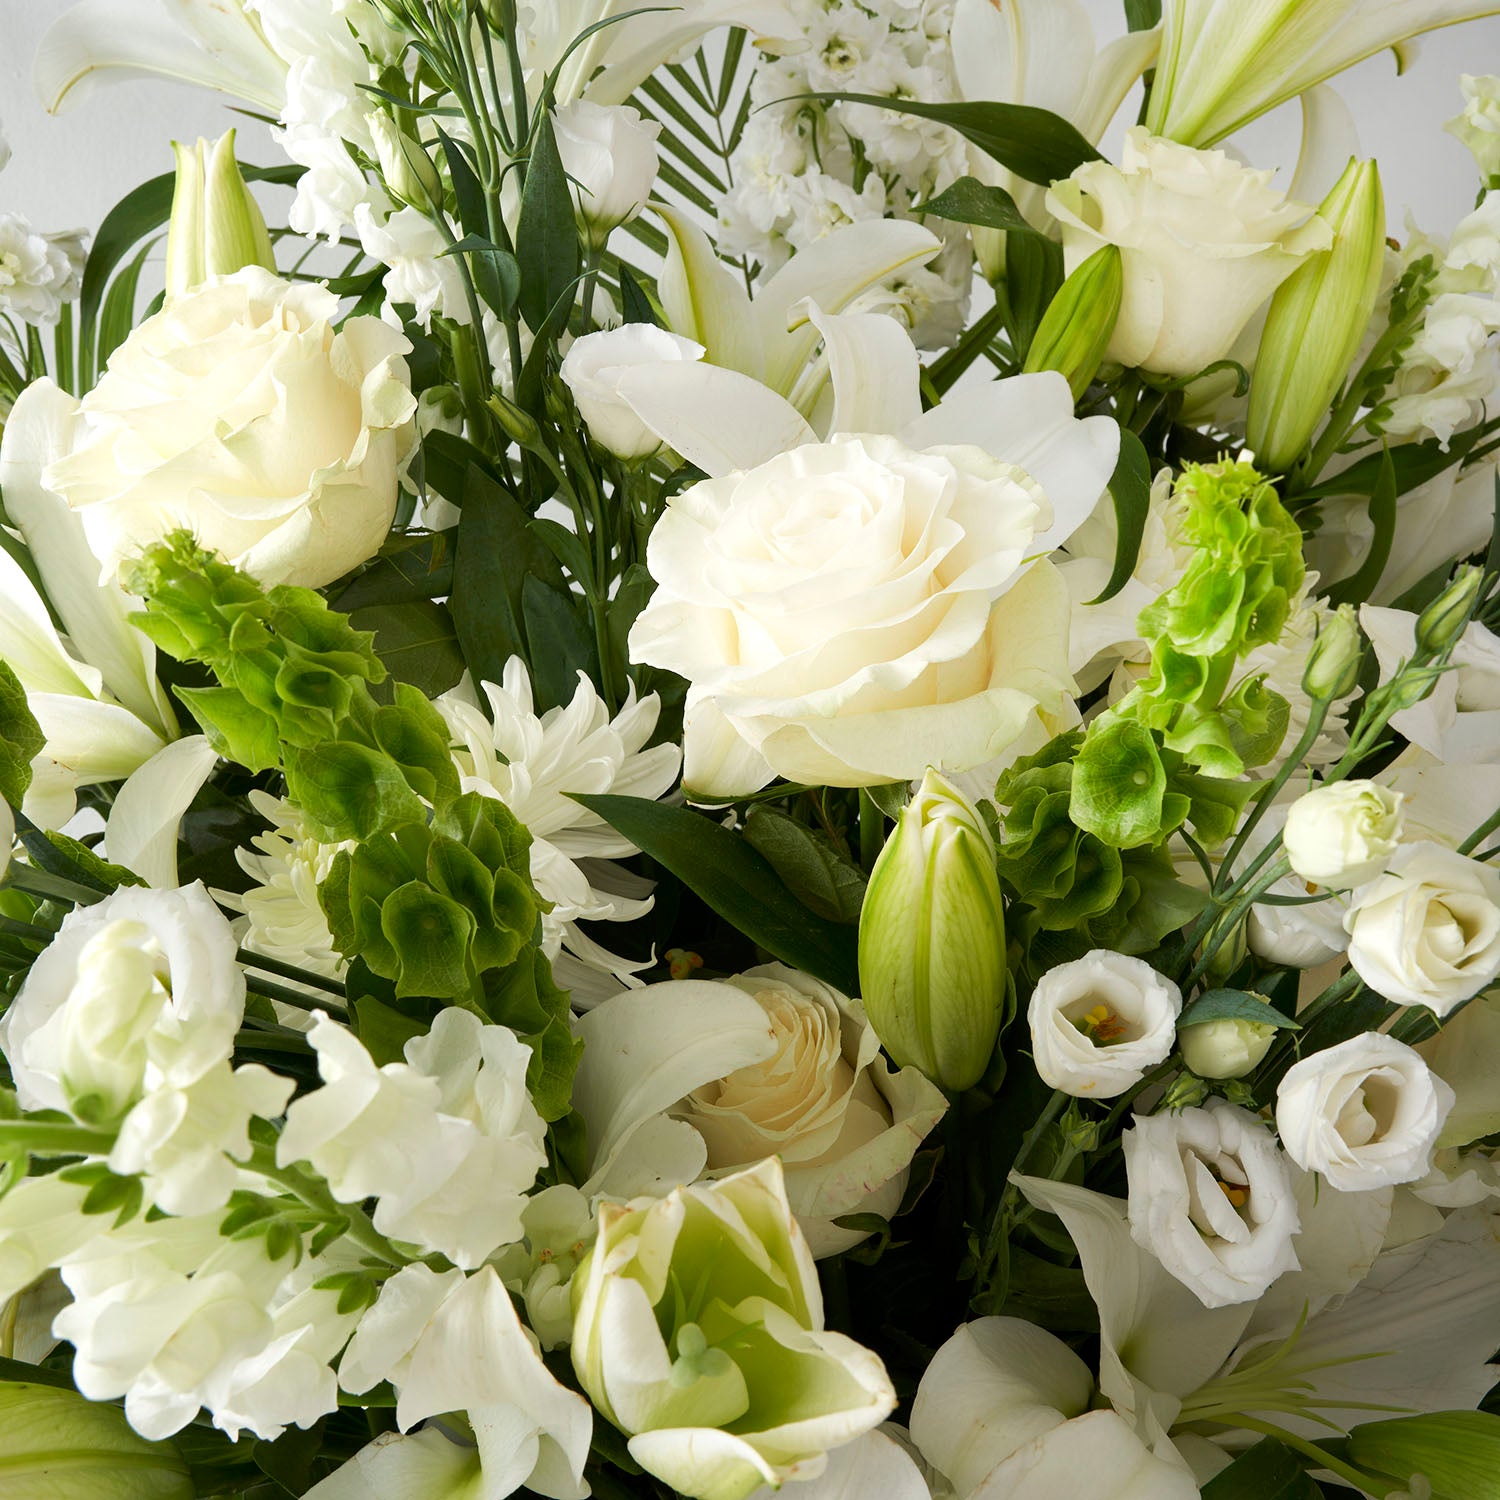 Closeup of all white and green flowers.